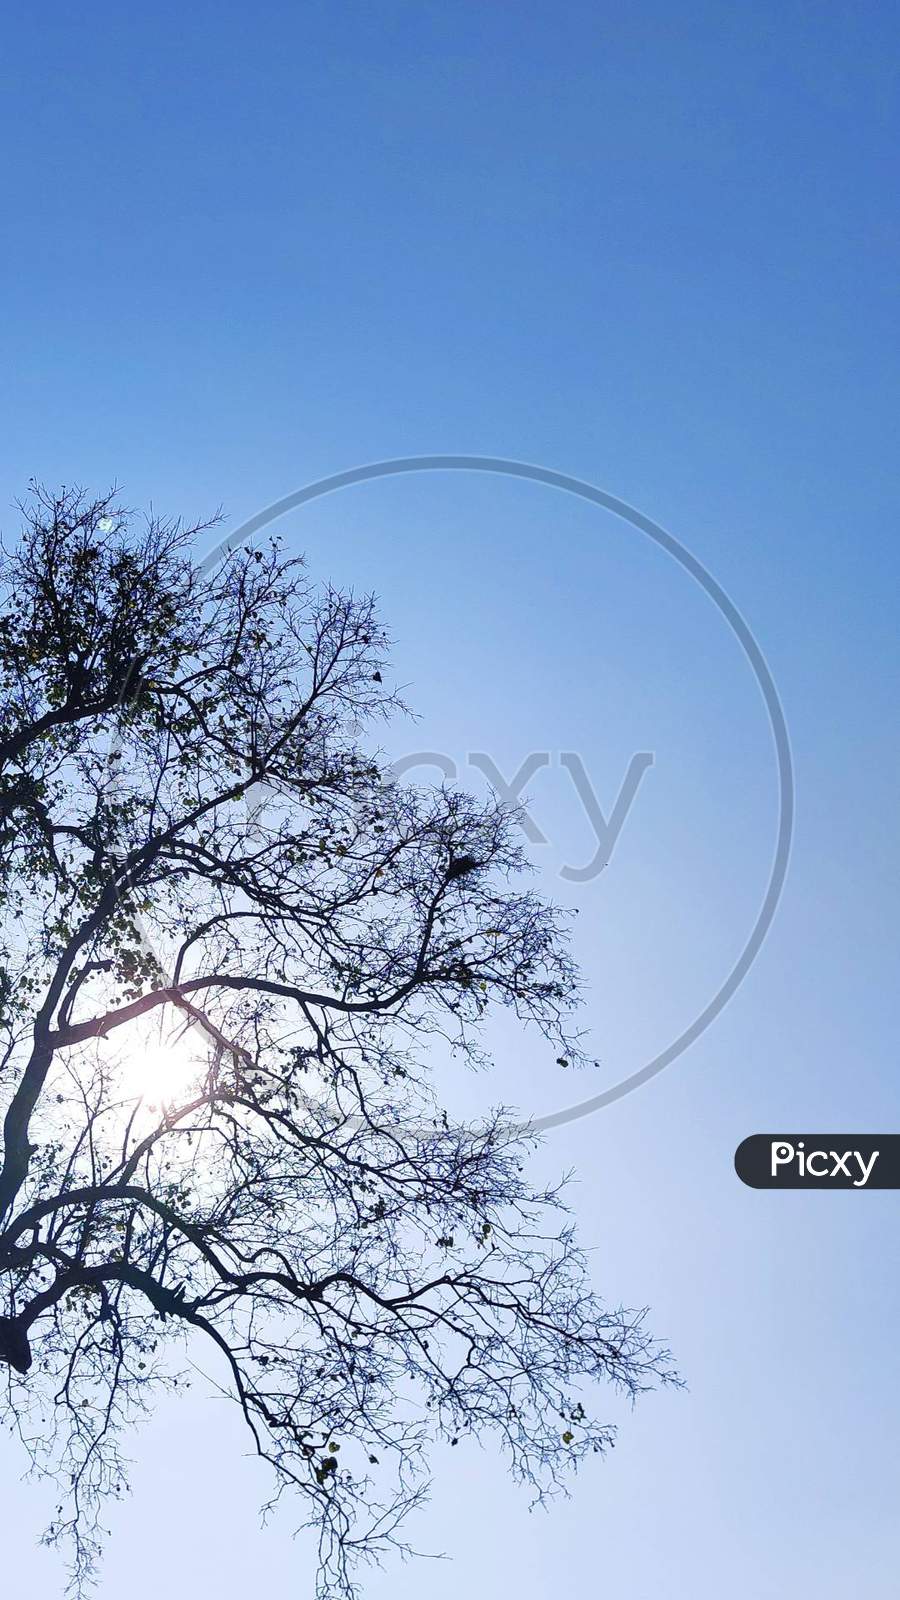 A tree standing looking beautiful. The blue sky over around and also sun is shining on the top. beautiful image of sun and tree combination. Blue sky ,tree and sun are in one shutter .